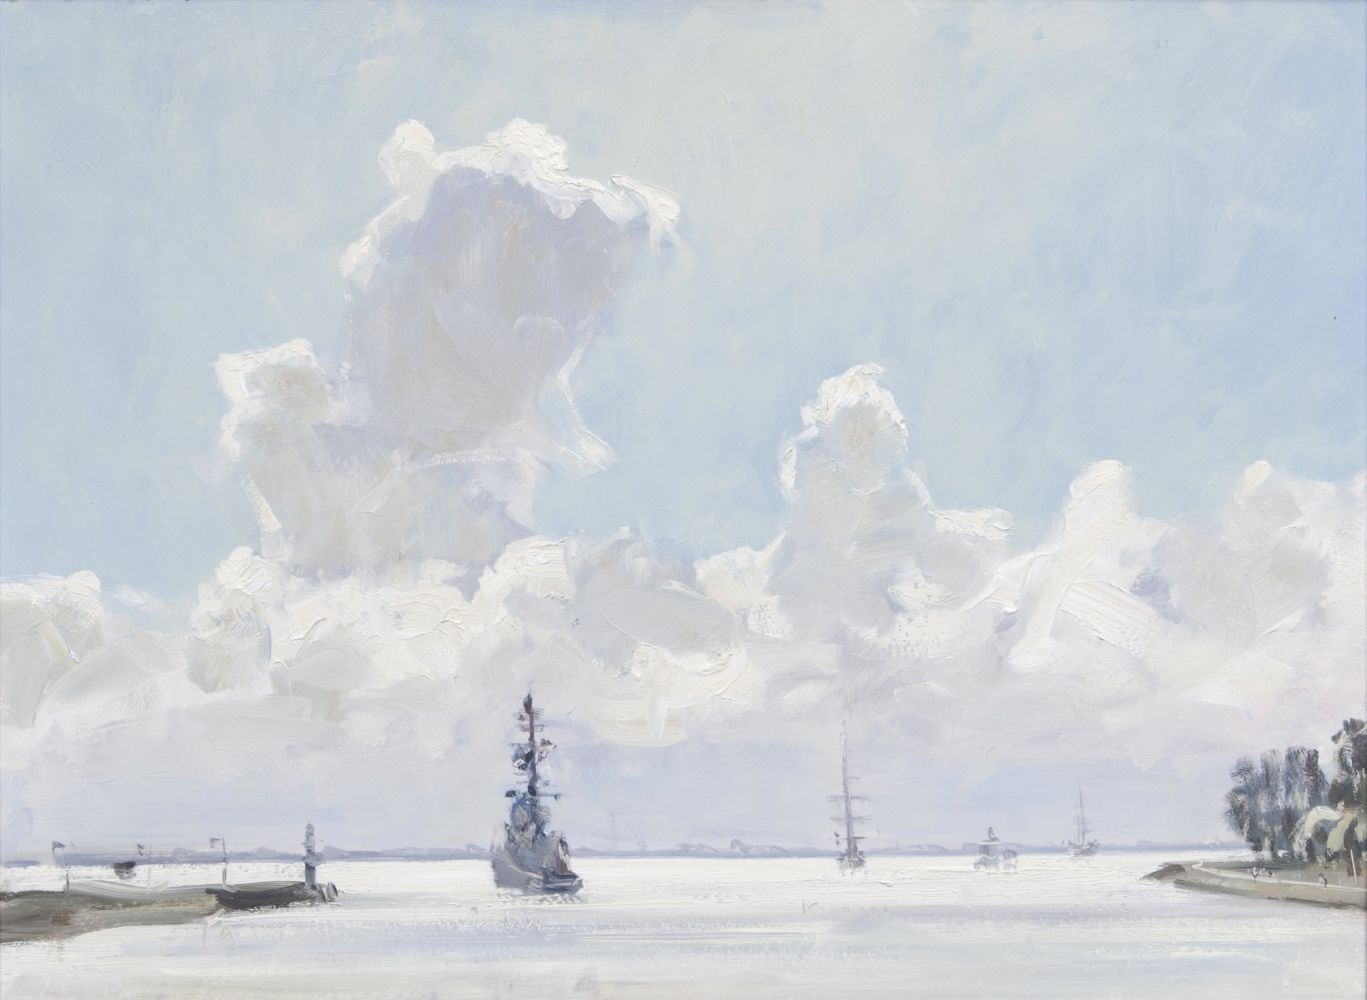 SHIPS by Friedel Anderson, 2001